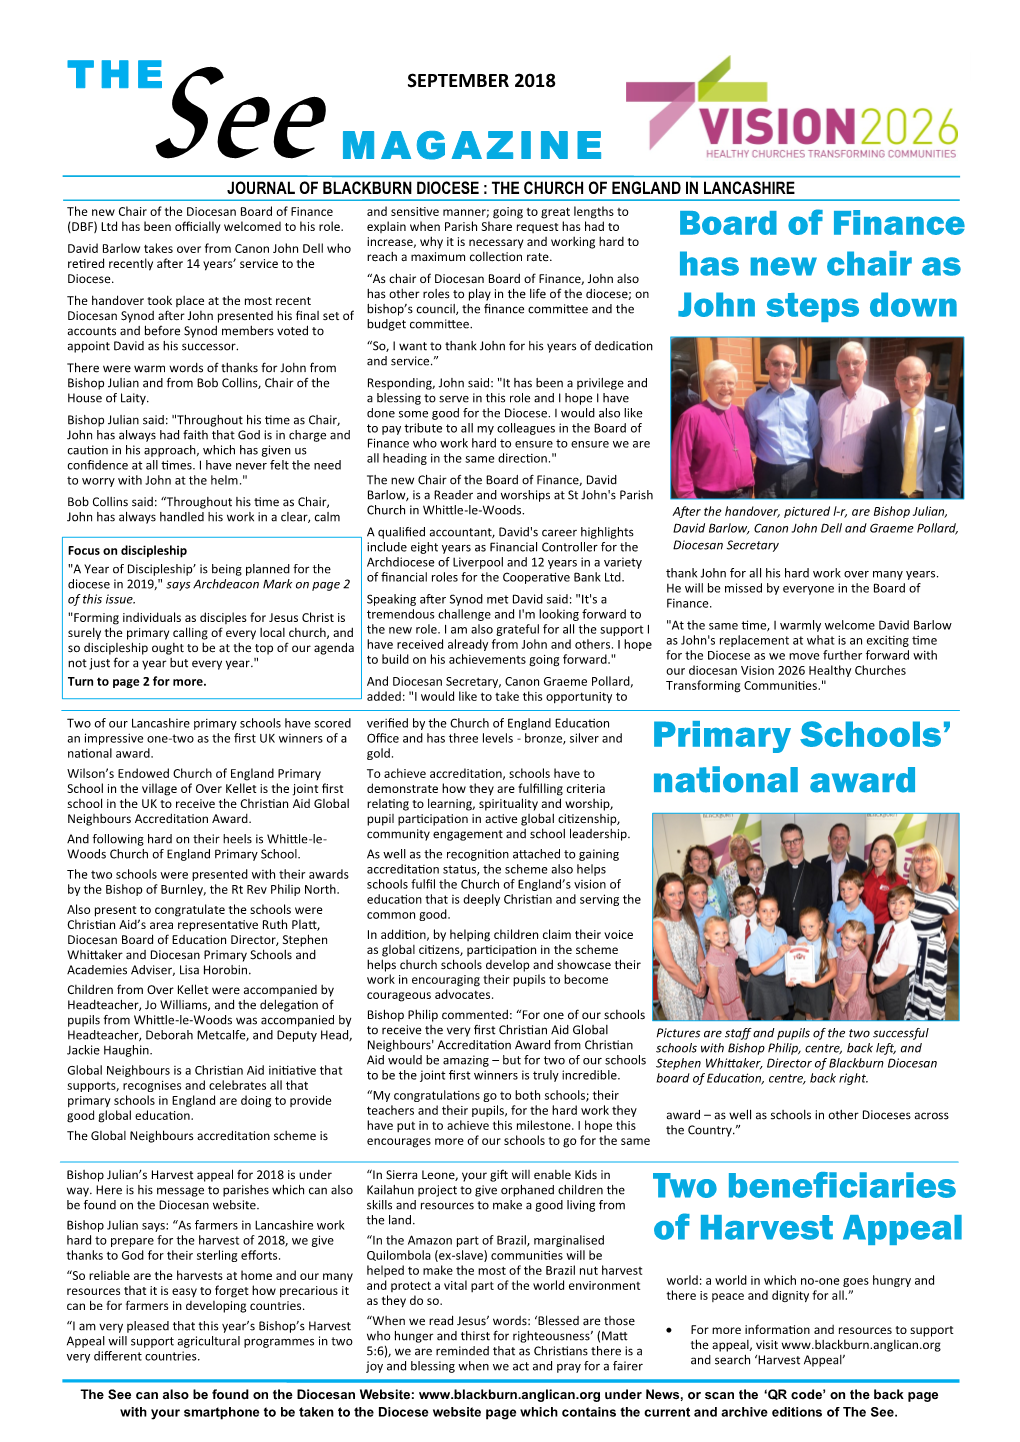 THE See MAGAZINE Primary Schools' National Award